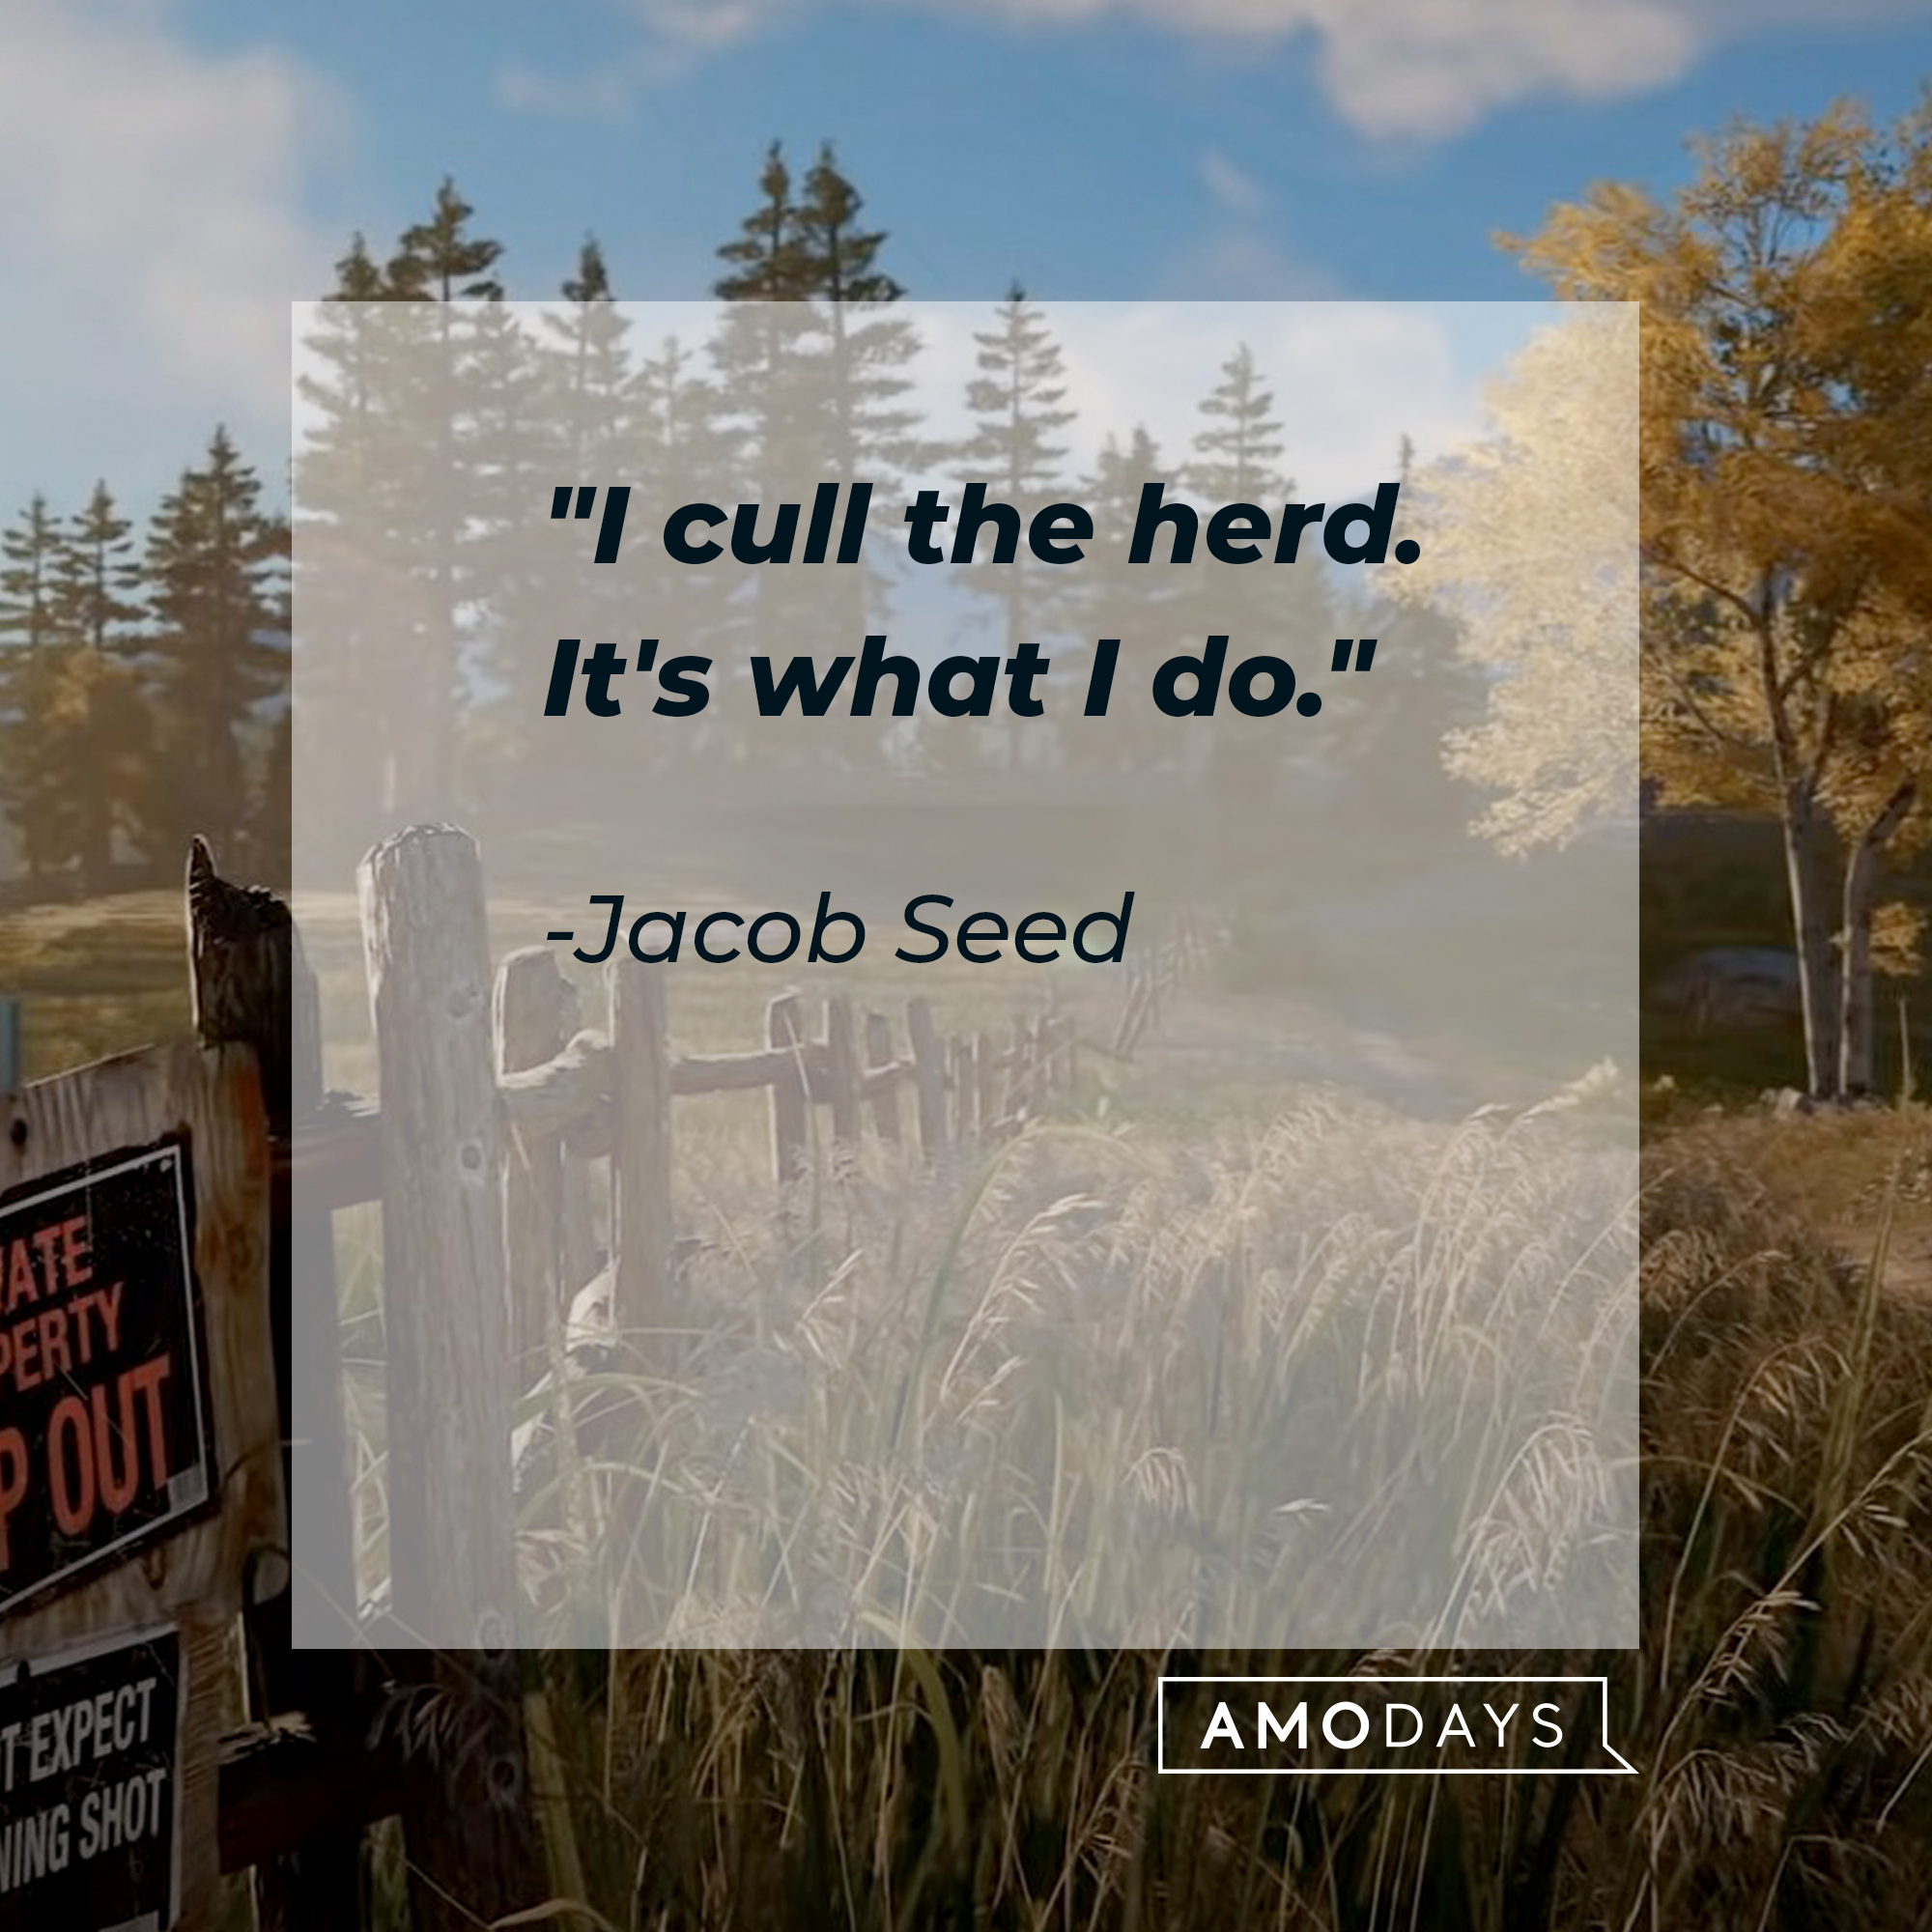 An image of "Far Cry 5" with Jacob Seed's quote: "I cull the herd. It's what I do." | Source: youtube.com/Ubisoft North America